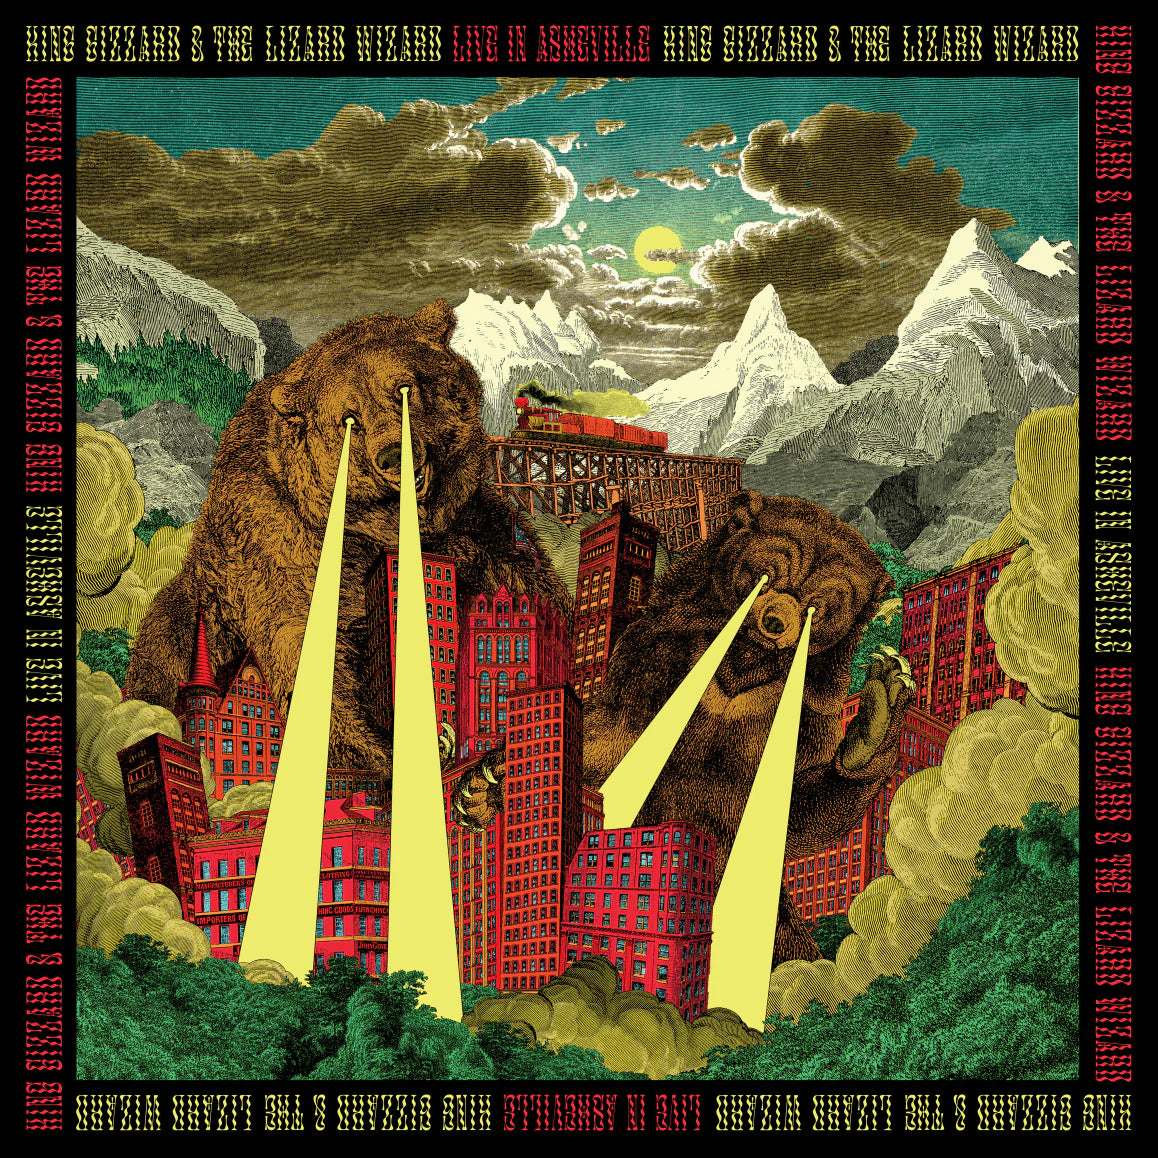 King Gizzard and the Lizard Wizard -  Live In Asheville 3LP (Fuzz Club, 180g, Indie Exclusive, Colored Vinyl, White)